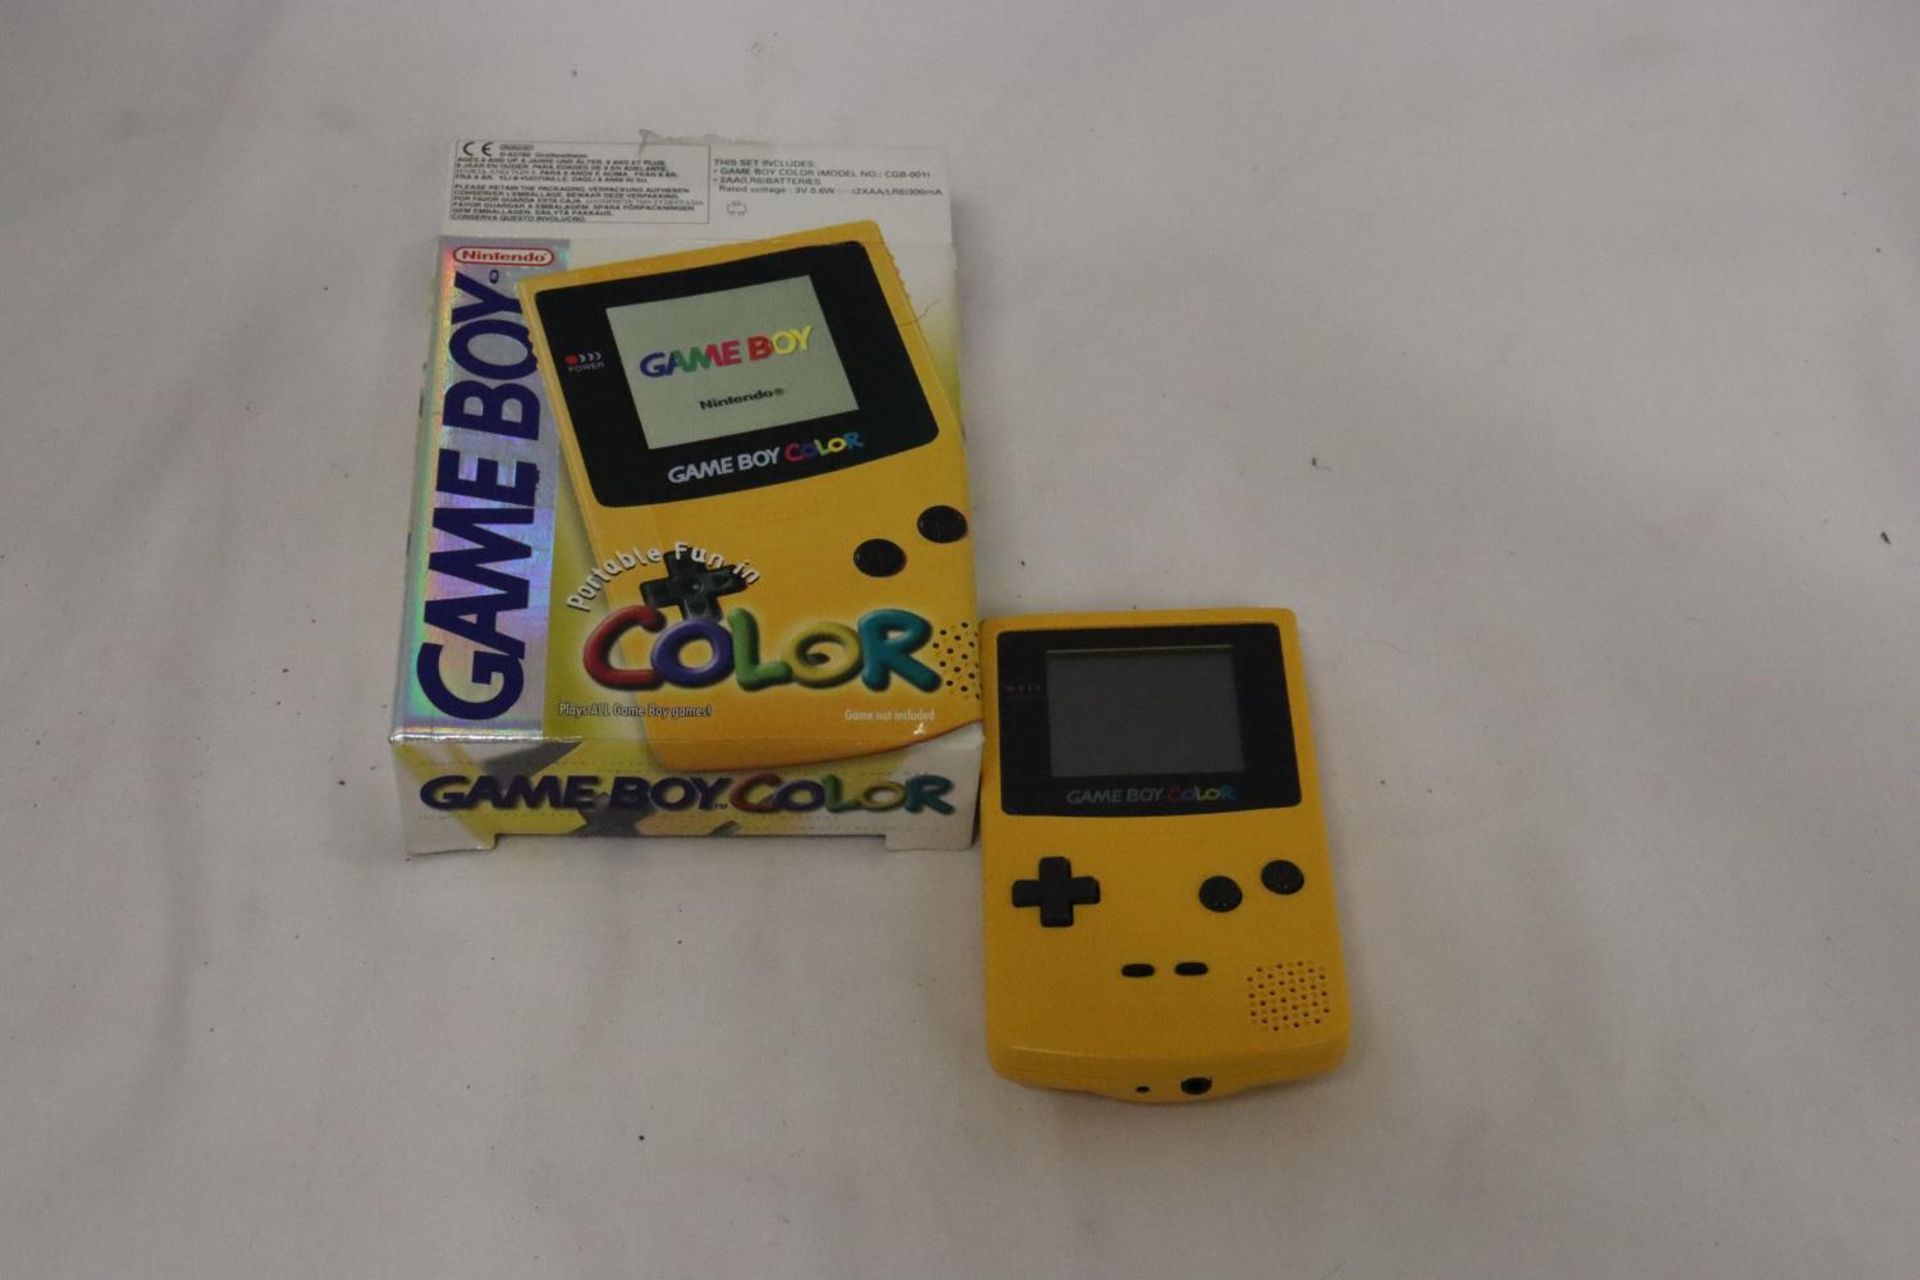 A BOXED GAMEBOY COLOUR, PORTABLE HANDHELD GAMES CONSOLE